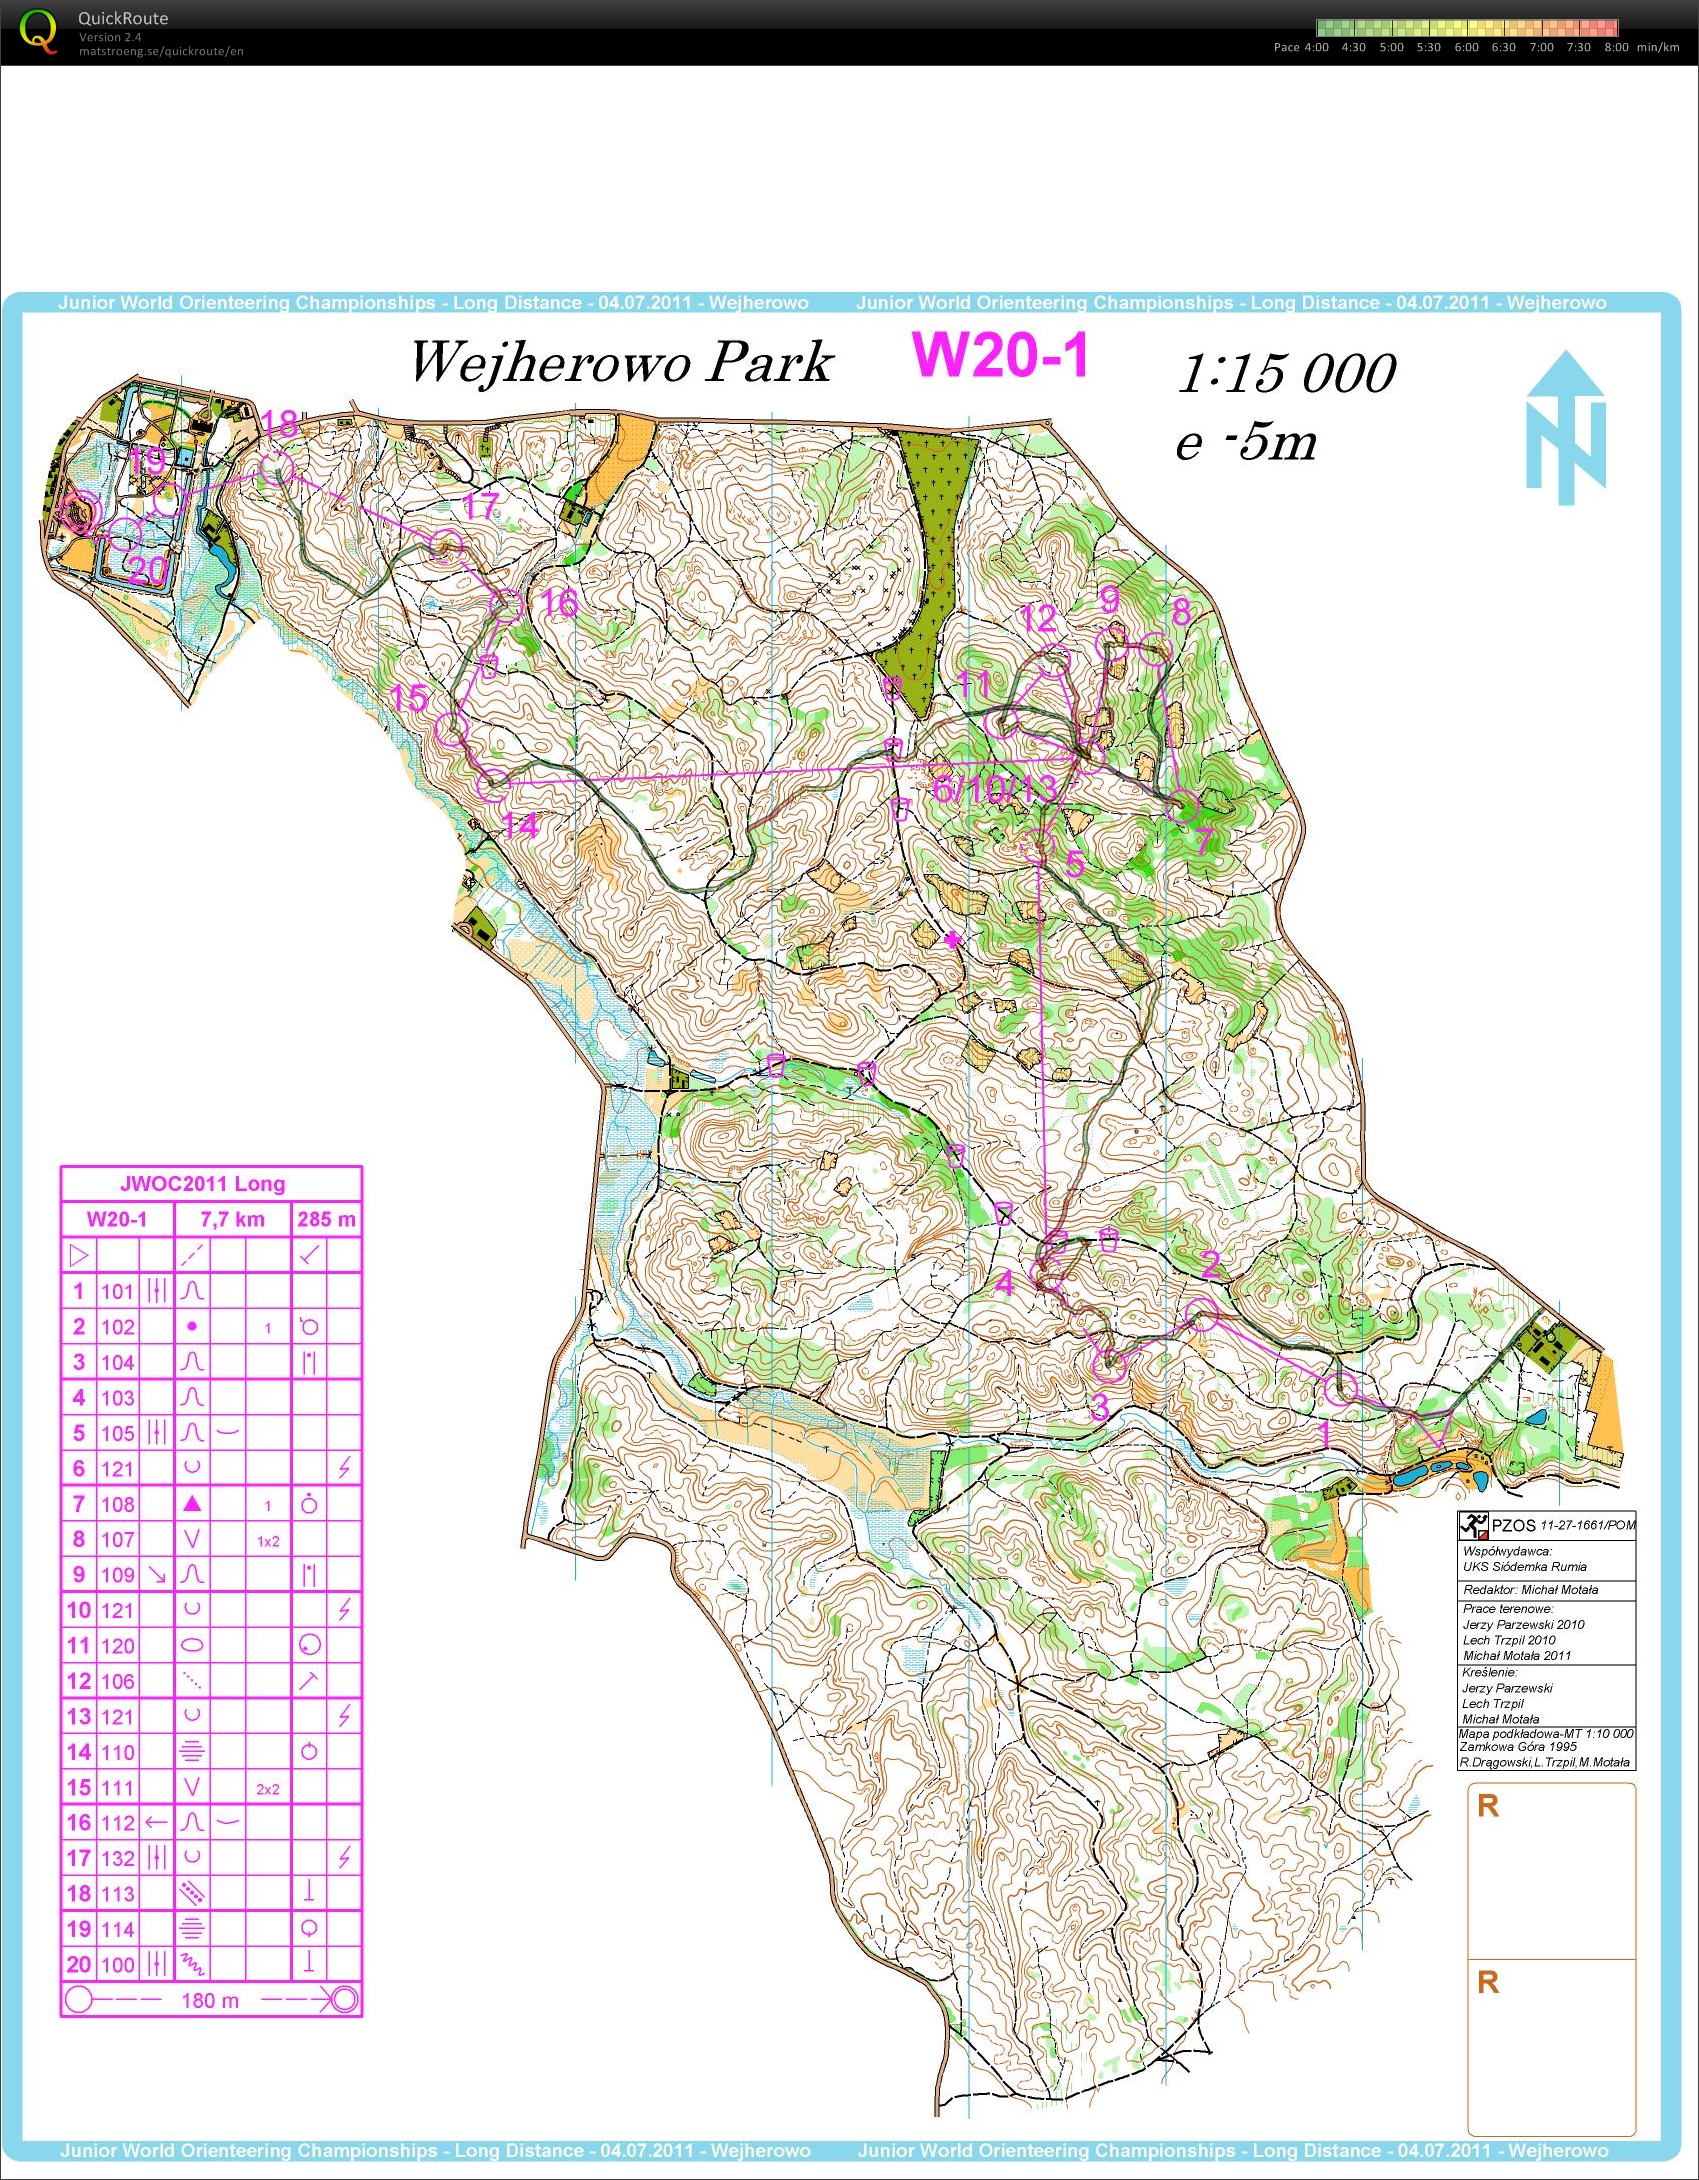 MP camp, long W20 from JWOC 2011 (2014-09-13)